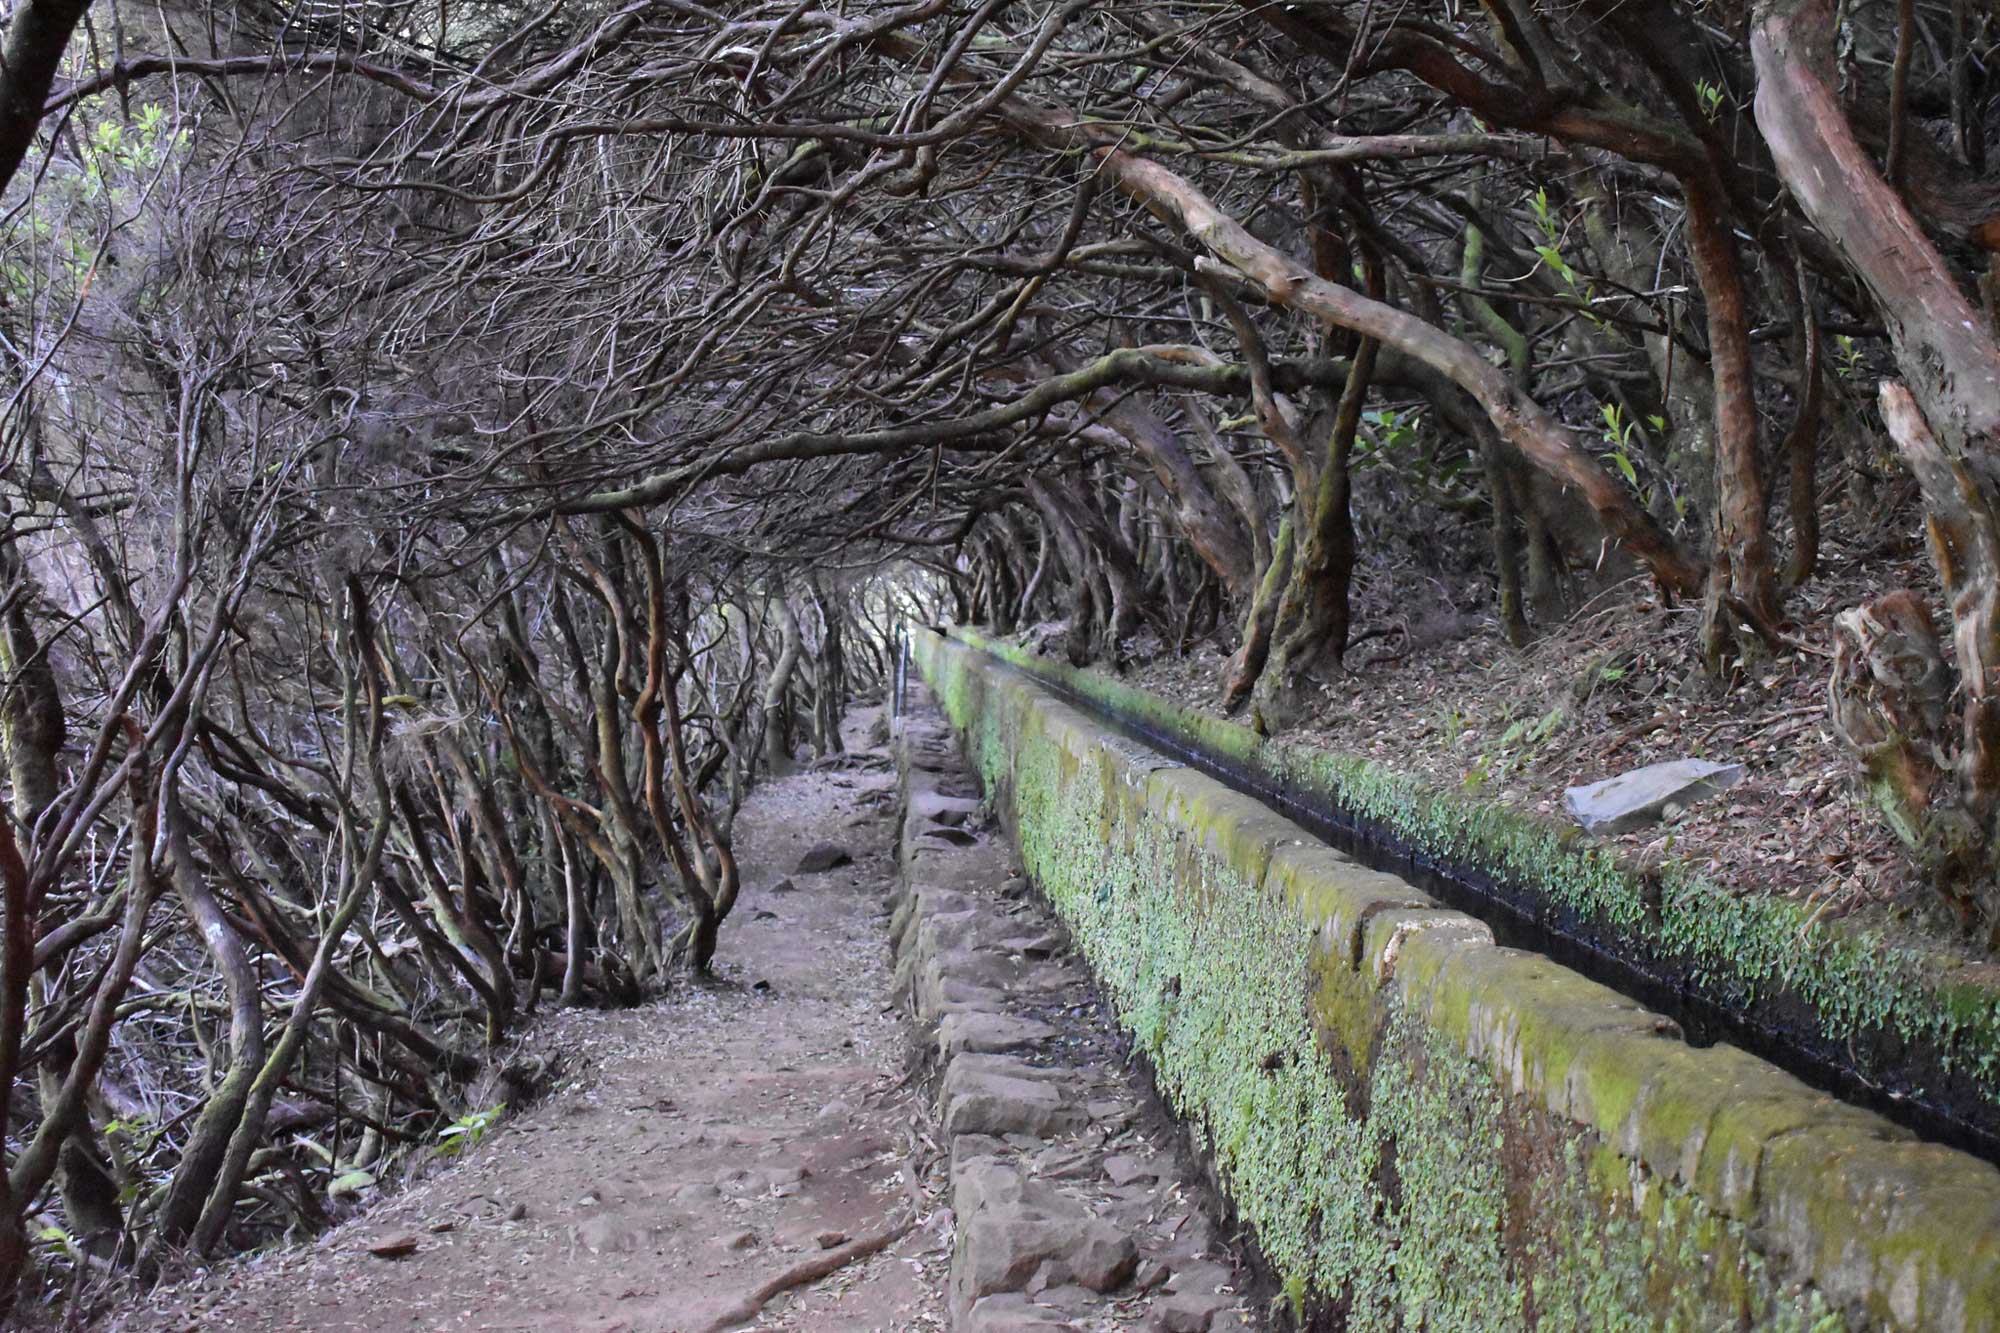 Photograph of a levada, a structure used for irrigation, on the island of Madeira. The photograph shows a narrow, elevated ditch made of stone with lichens, liverworts, or mosses growing on it. The ditch has a path running next to it, and both levada and trail run through a tunnel formed by overarching tree branches.